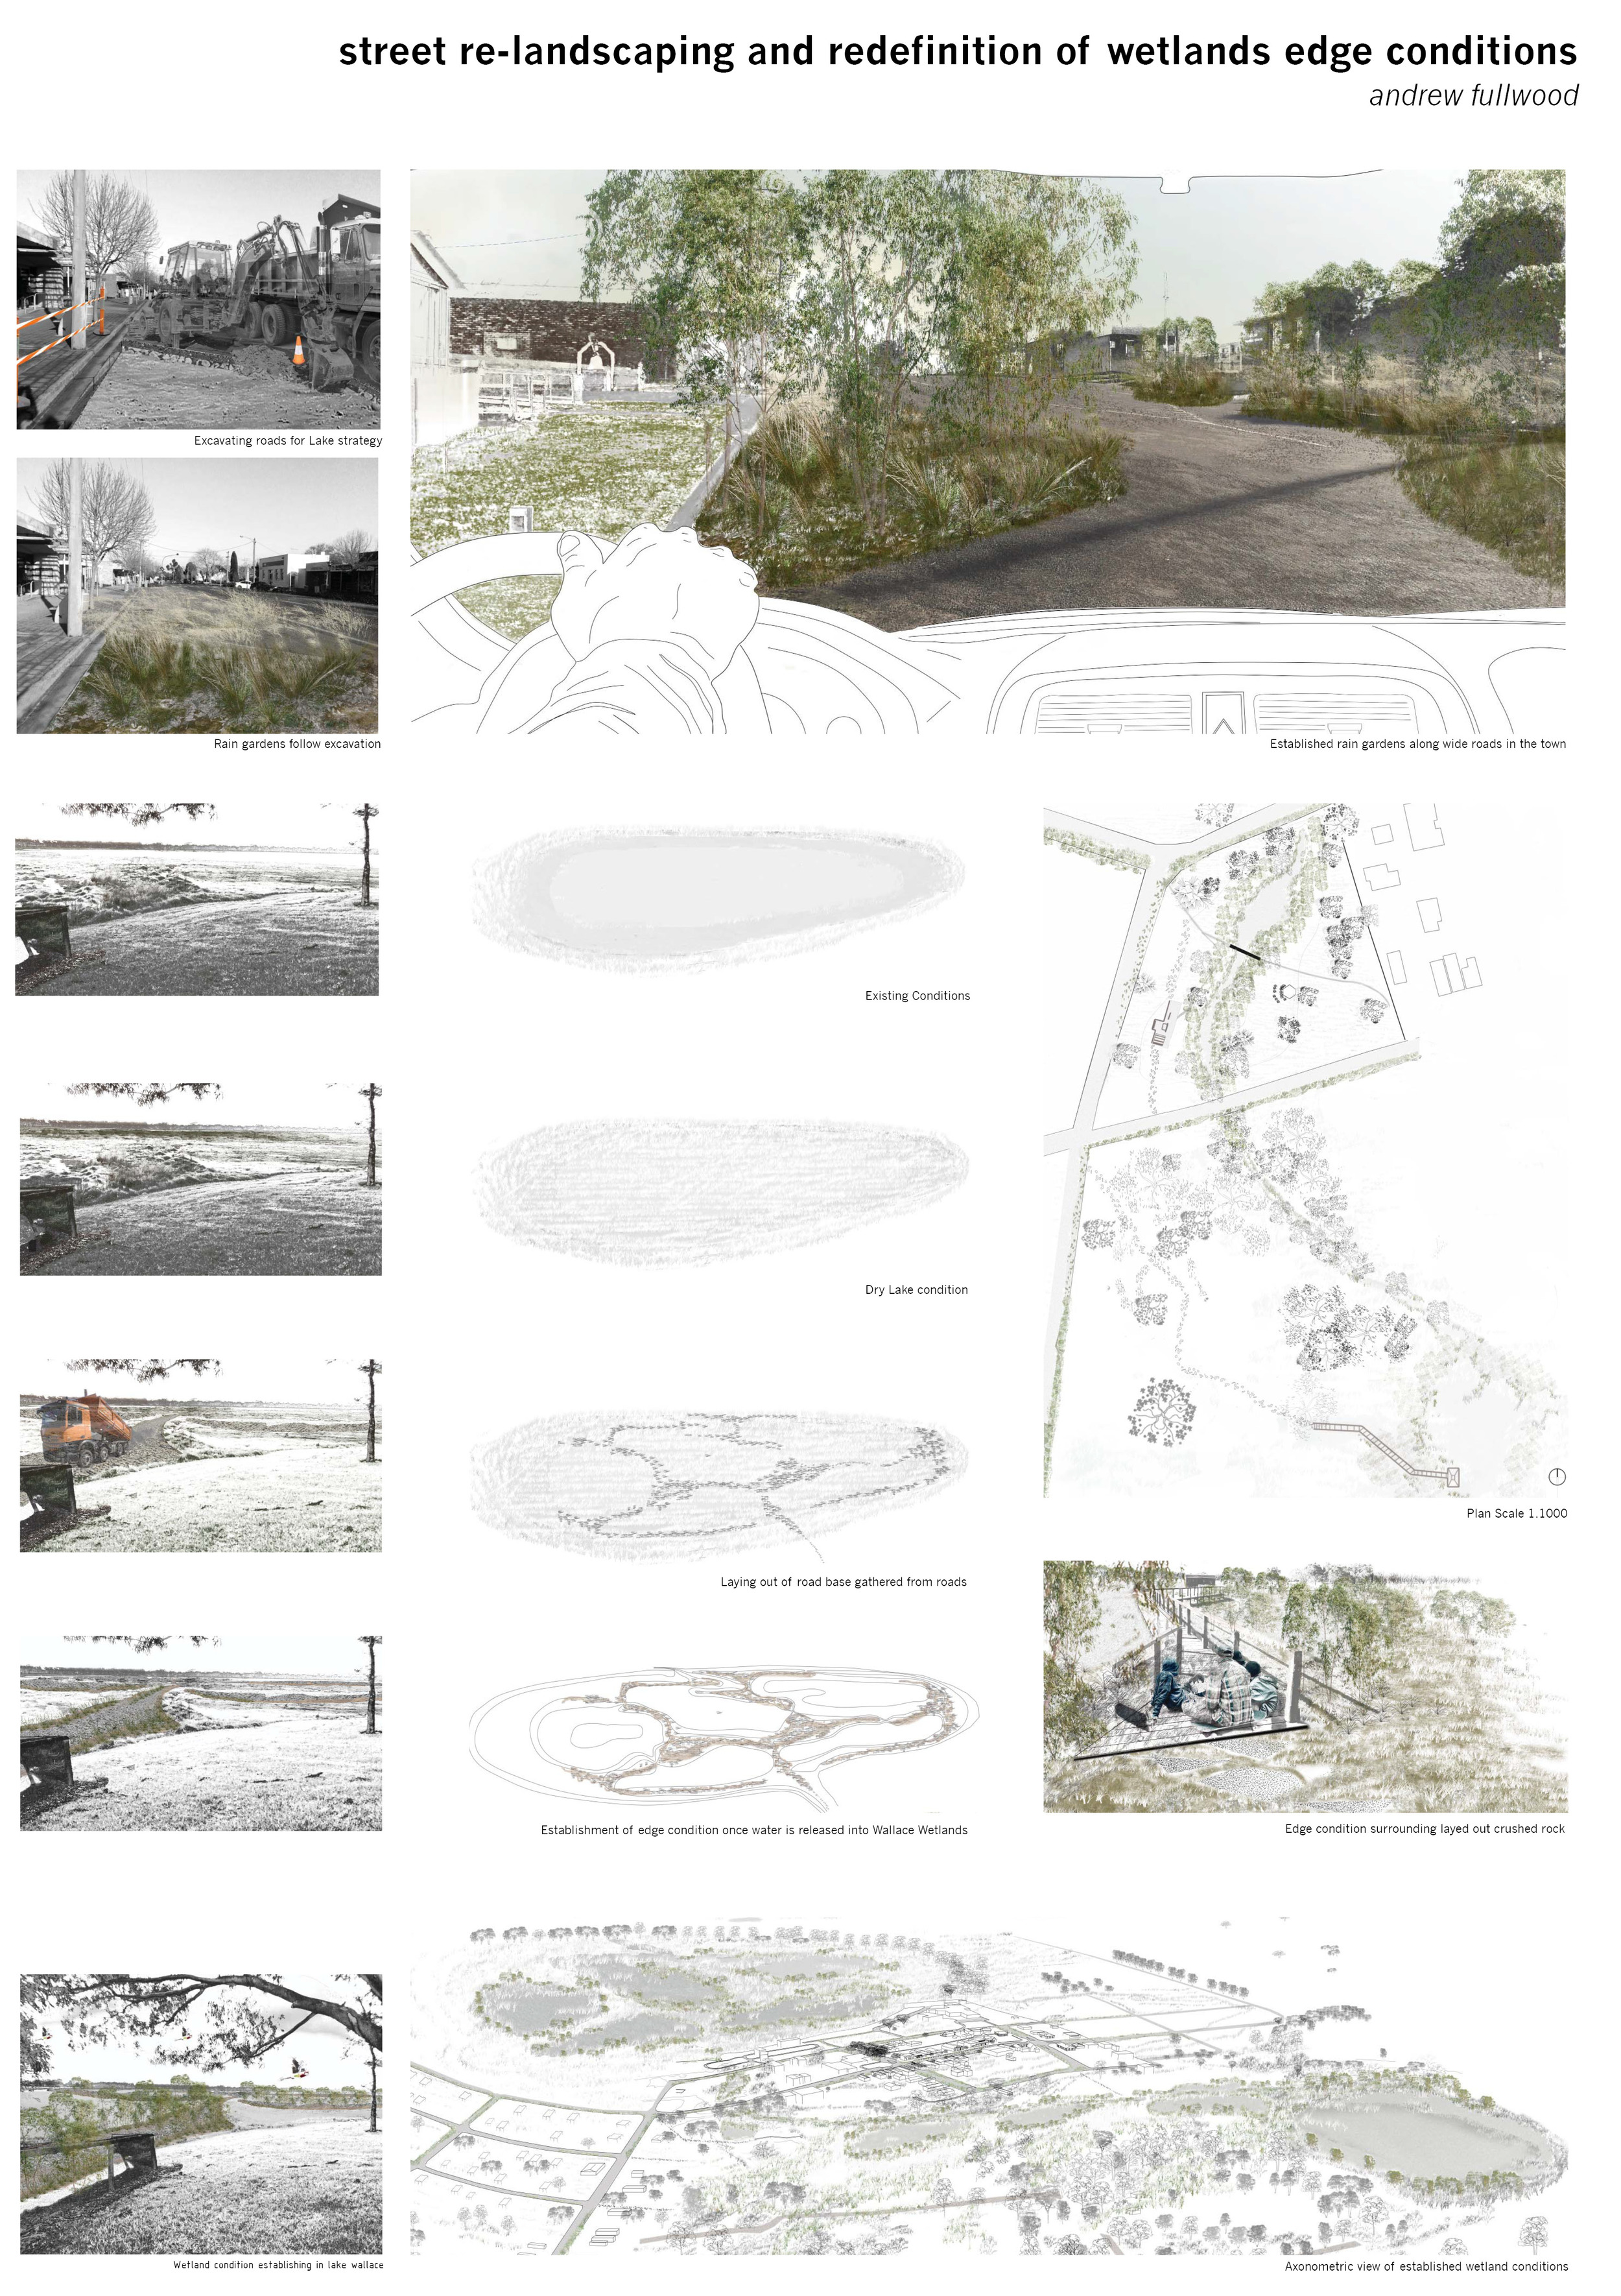  The surplus hard surfaces of Edenhope's streetscape has been reduced and transformed into urban green spaces. The excess rubble has been utilised in land formations that propose a series of connected wetlands that replace the idea of the 'back swamp